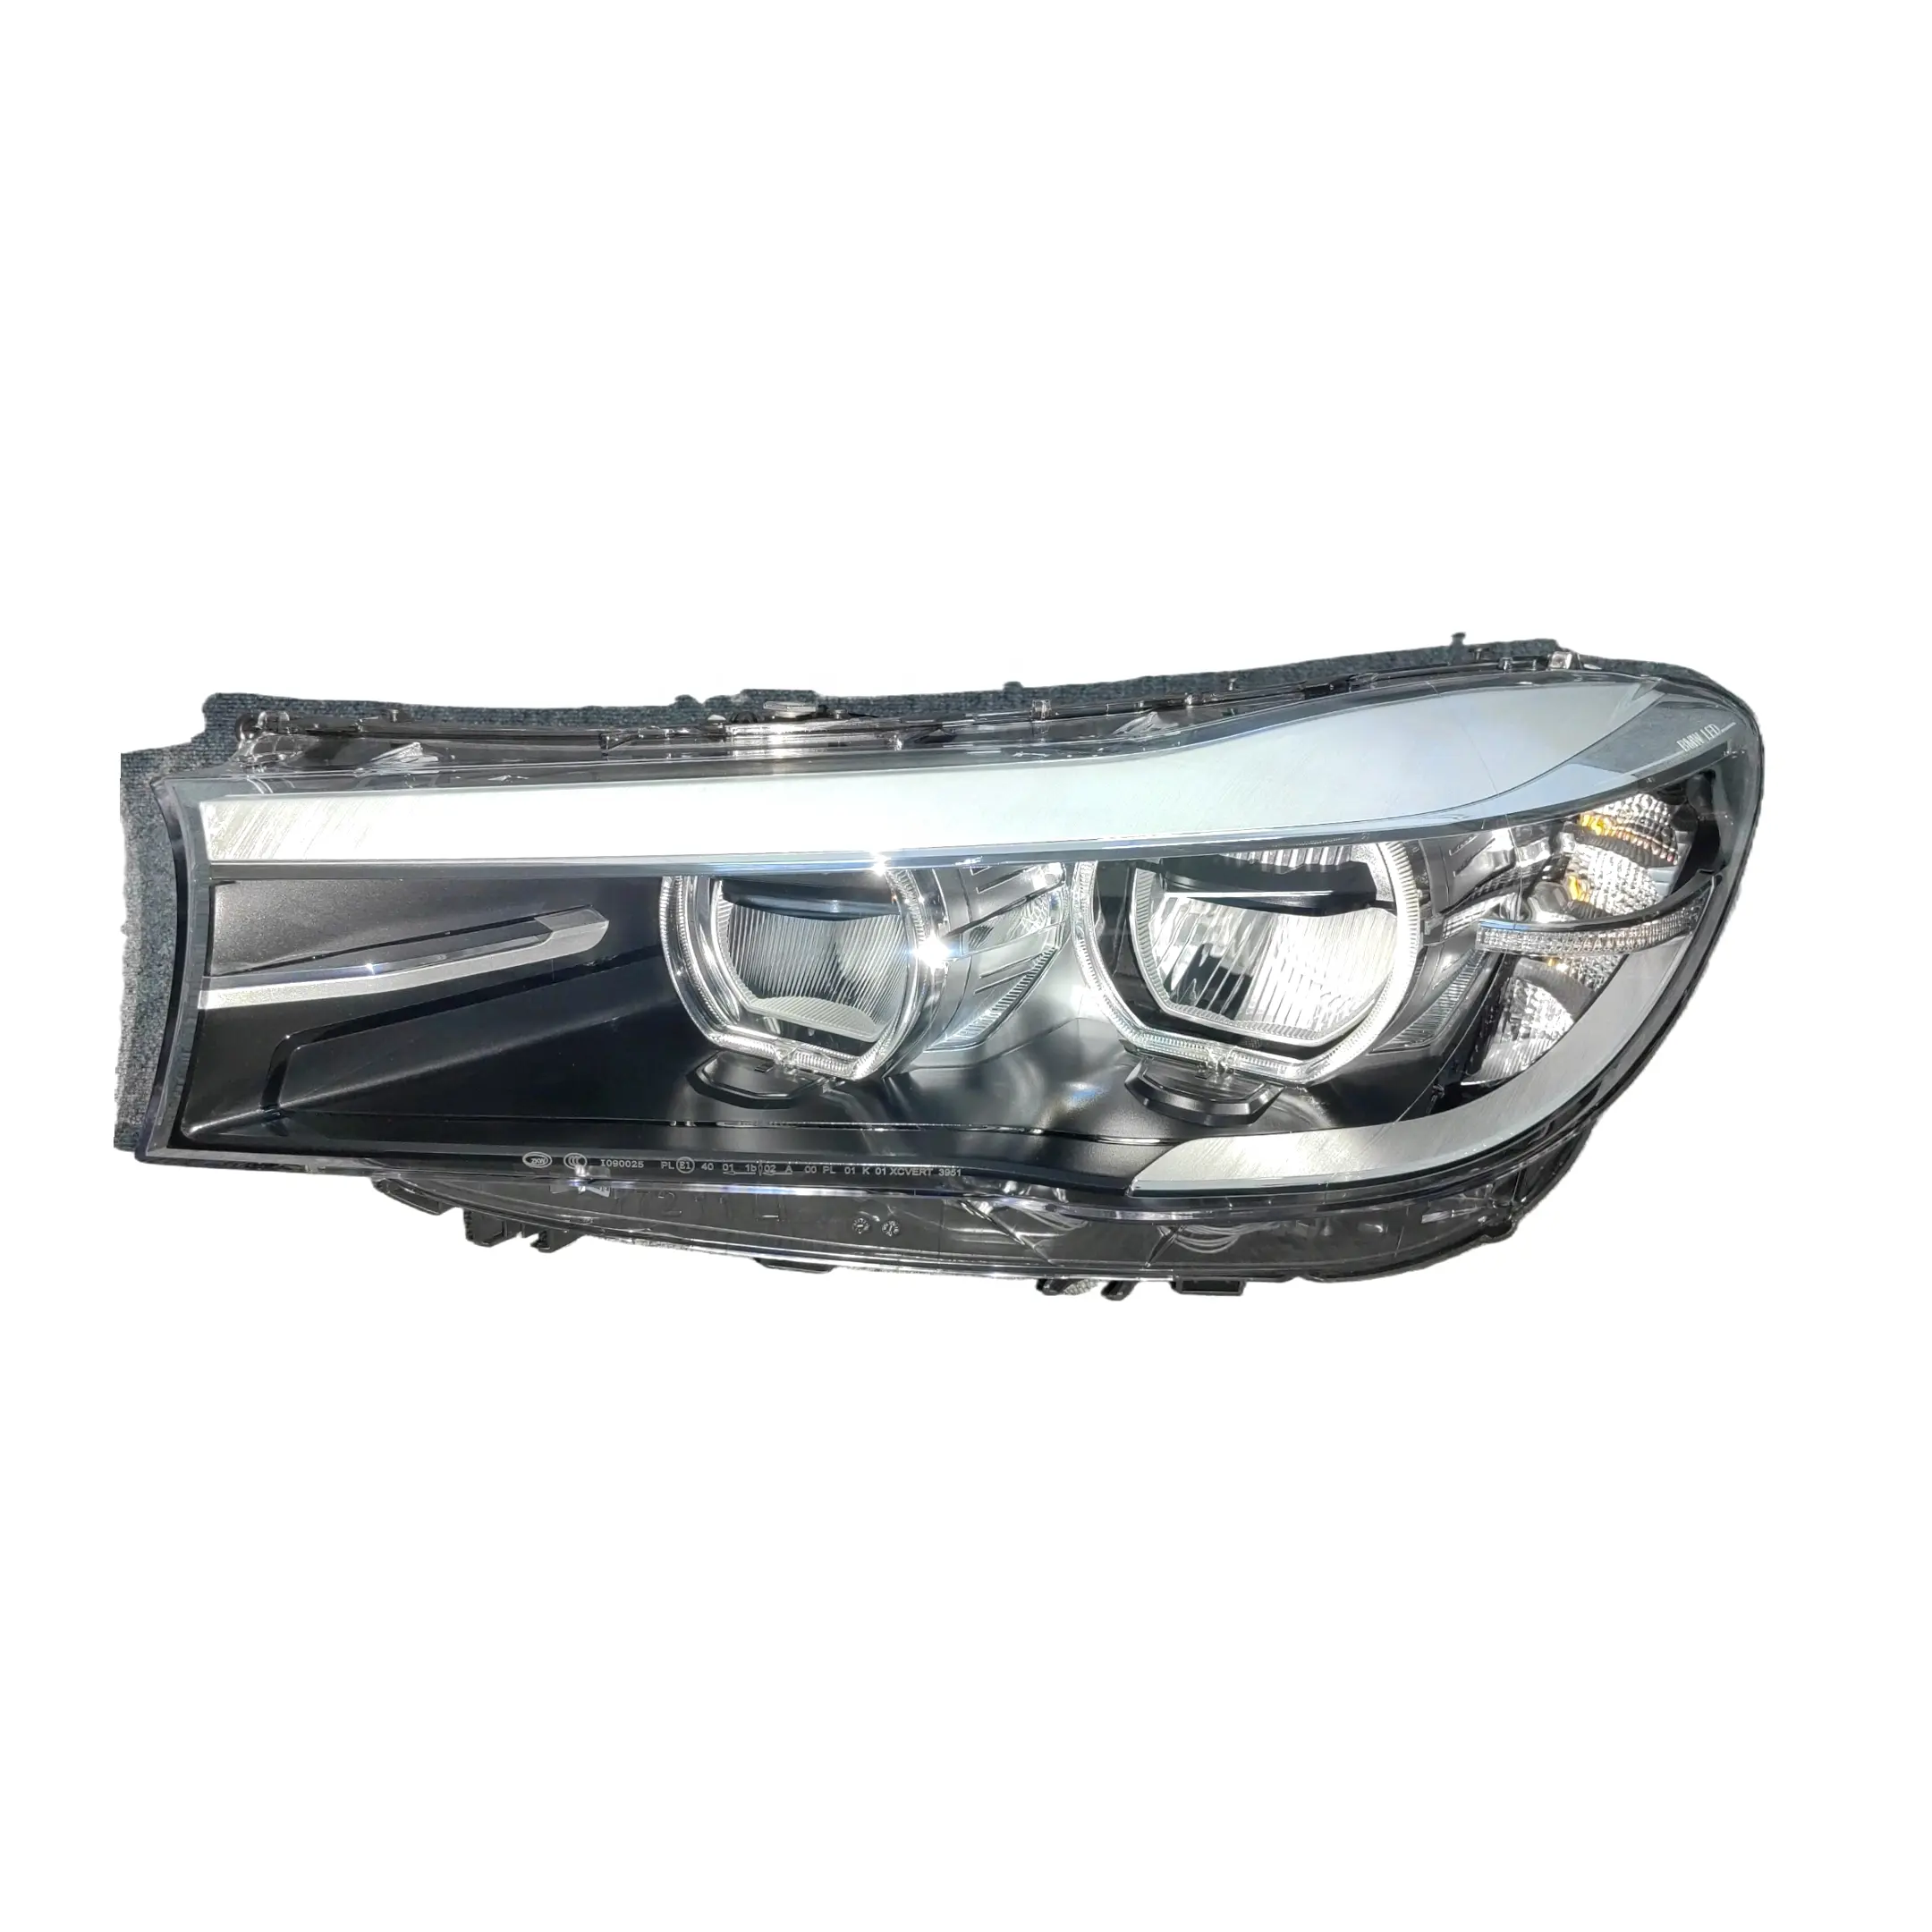 LED car headlight lamp is suitable for BMW 7 Series G11 G12 730 740 original LED headlight assembly